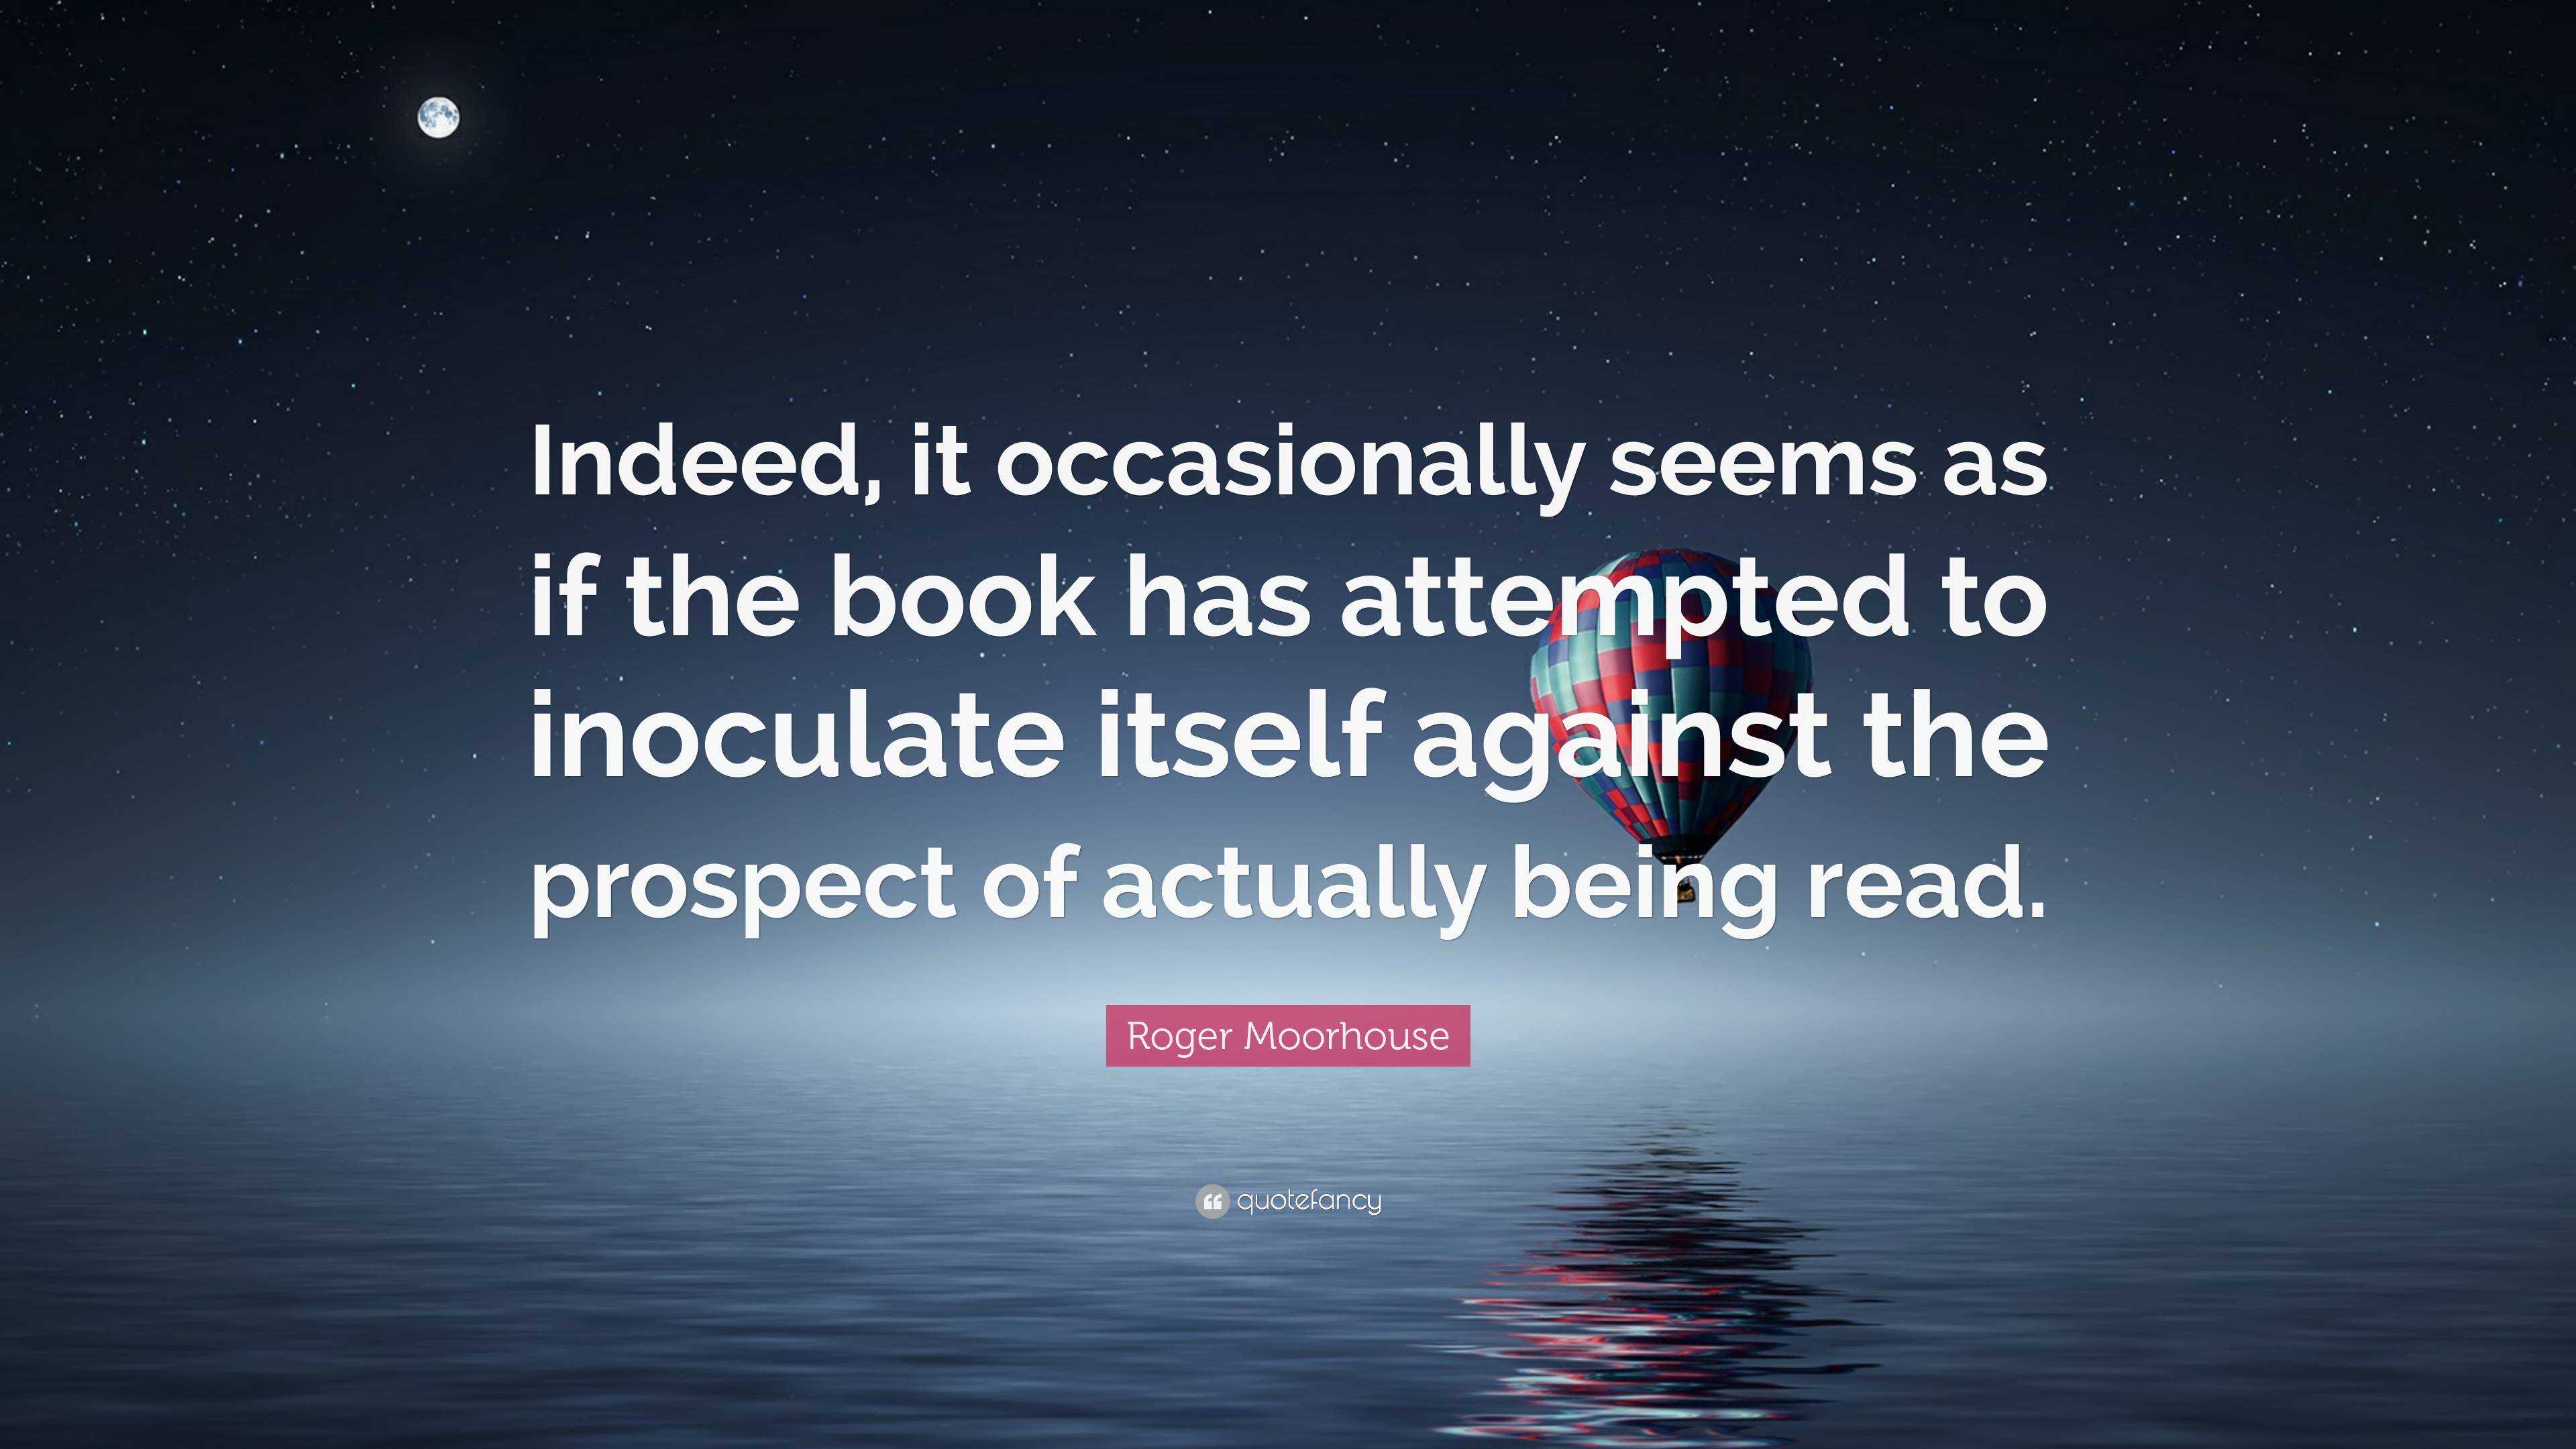 Roger Moorhouse Quote: “Indeed, it occasionally seems as if the book ...